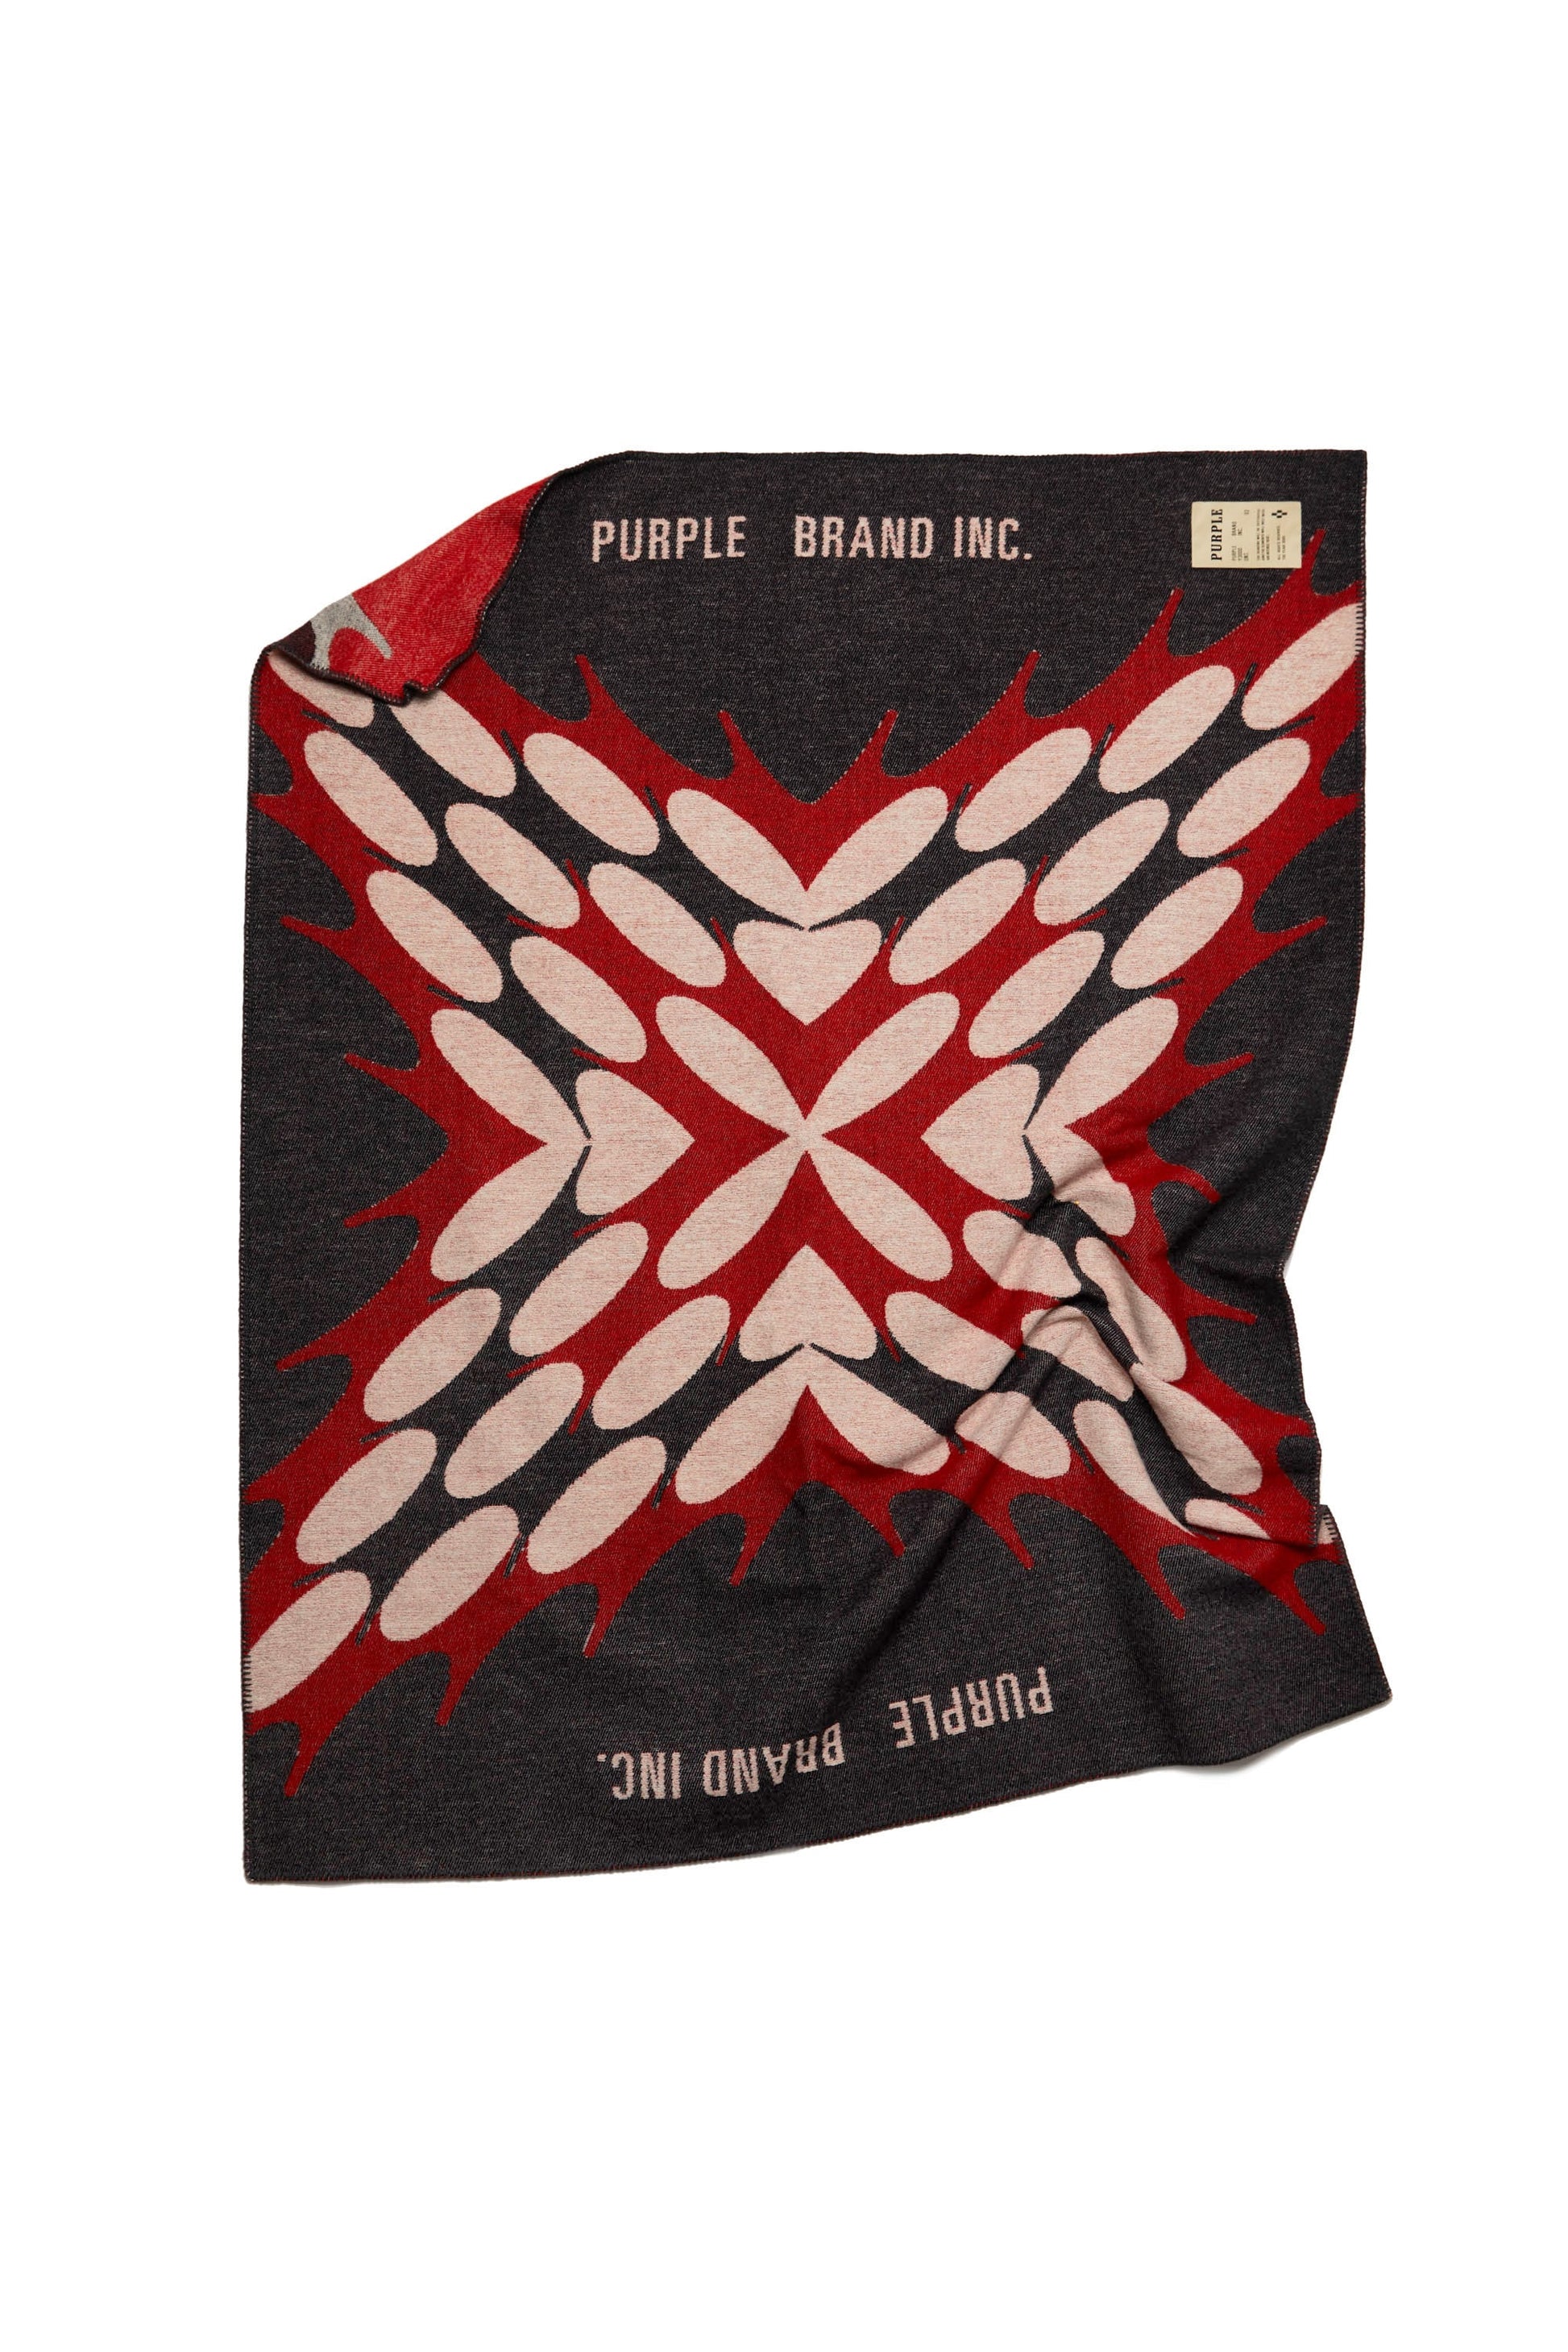 PURPLE BRAND - Scarf - Style No. P906 - Black Red Relic - Styled Flat Front